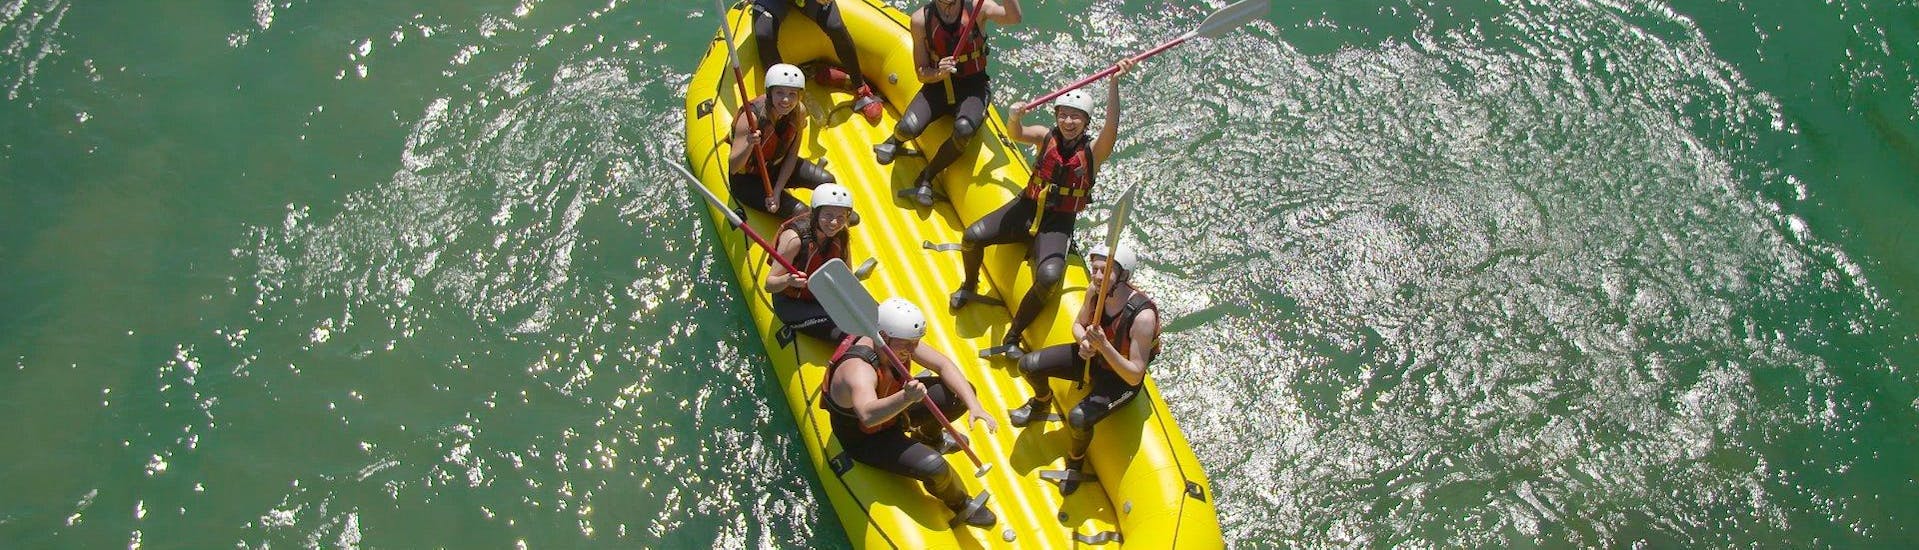 Rafting a Bled sul fiume Sava.